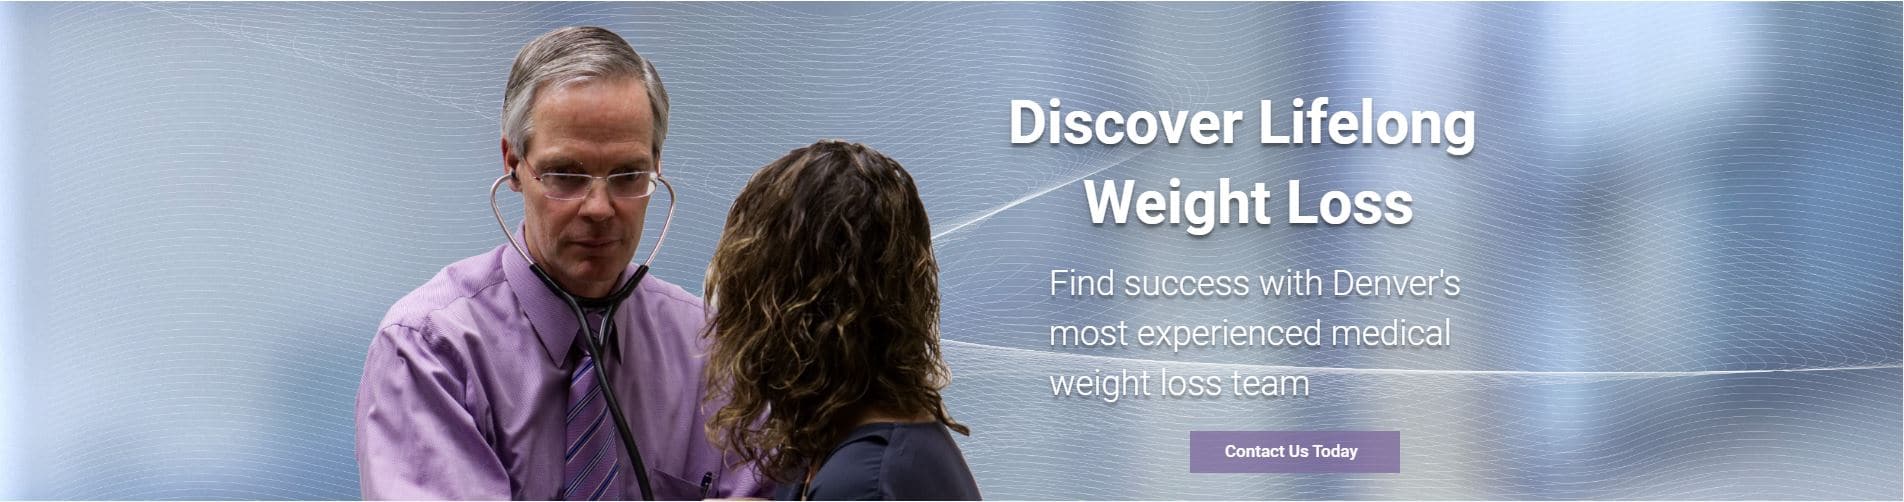 Discover Lifelong Weight Loss. Find Success with Denver's most experienced medical weight loss team. Contact us today.